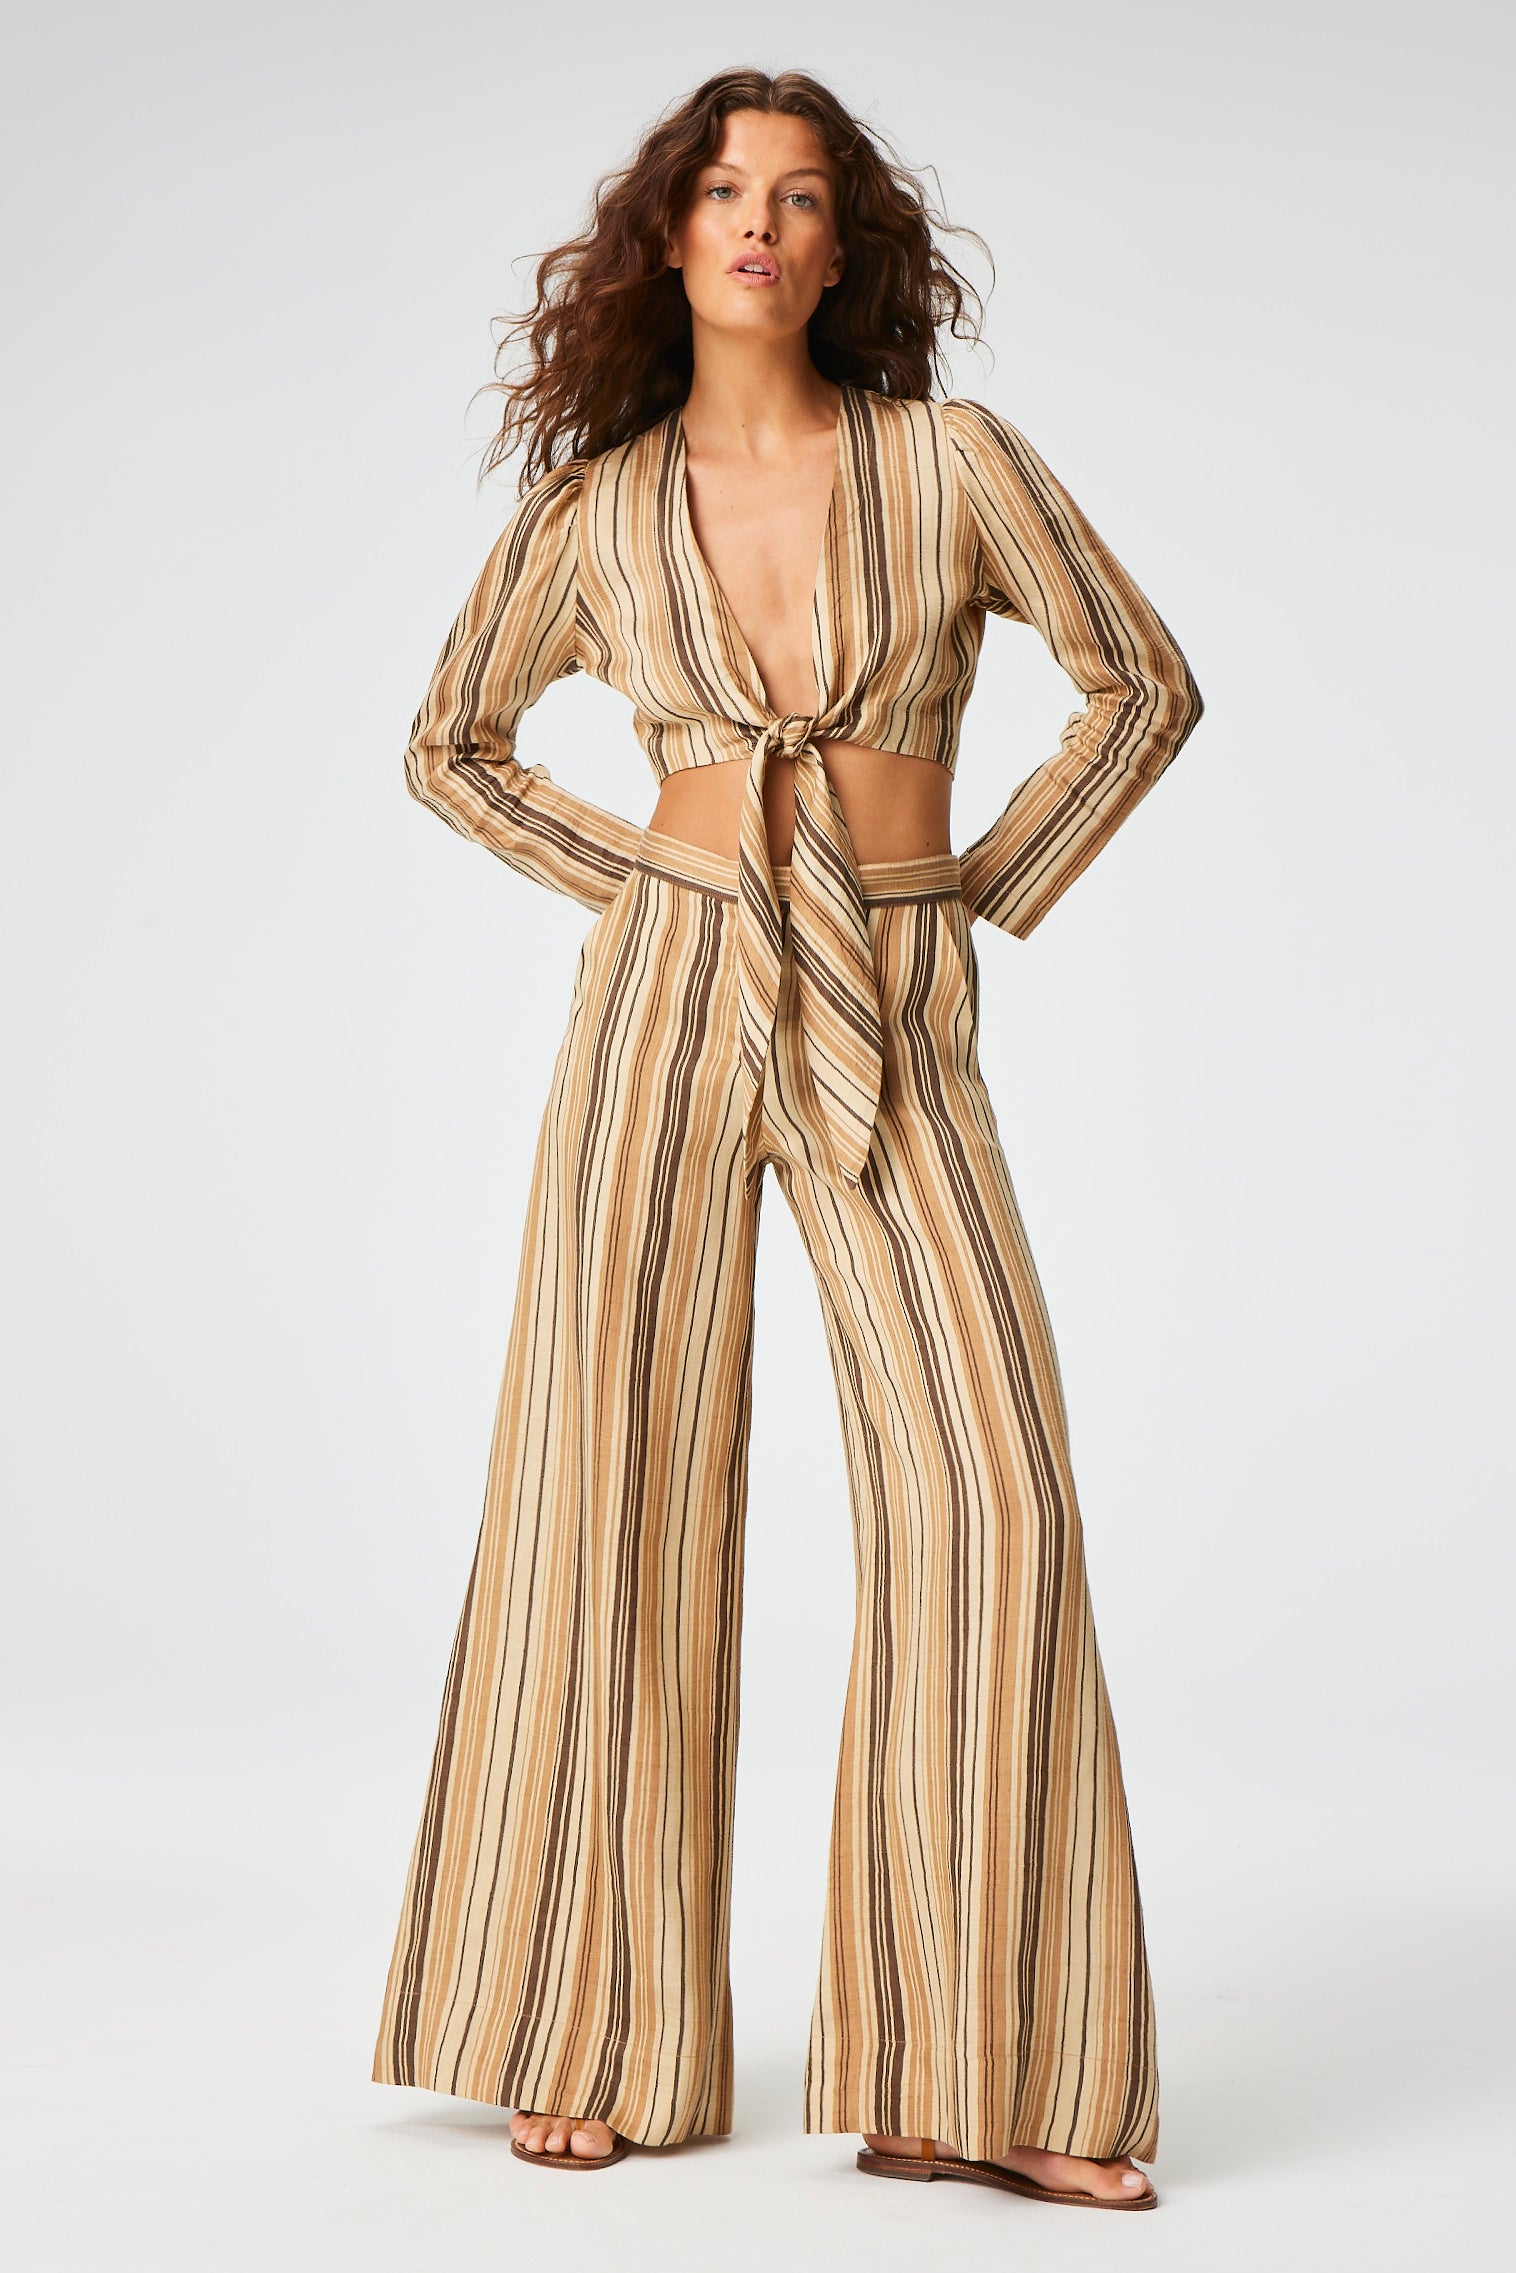 THE LOW-WAIST WIDE LEG PANT in SAND STRIPED LINEN